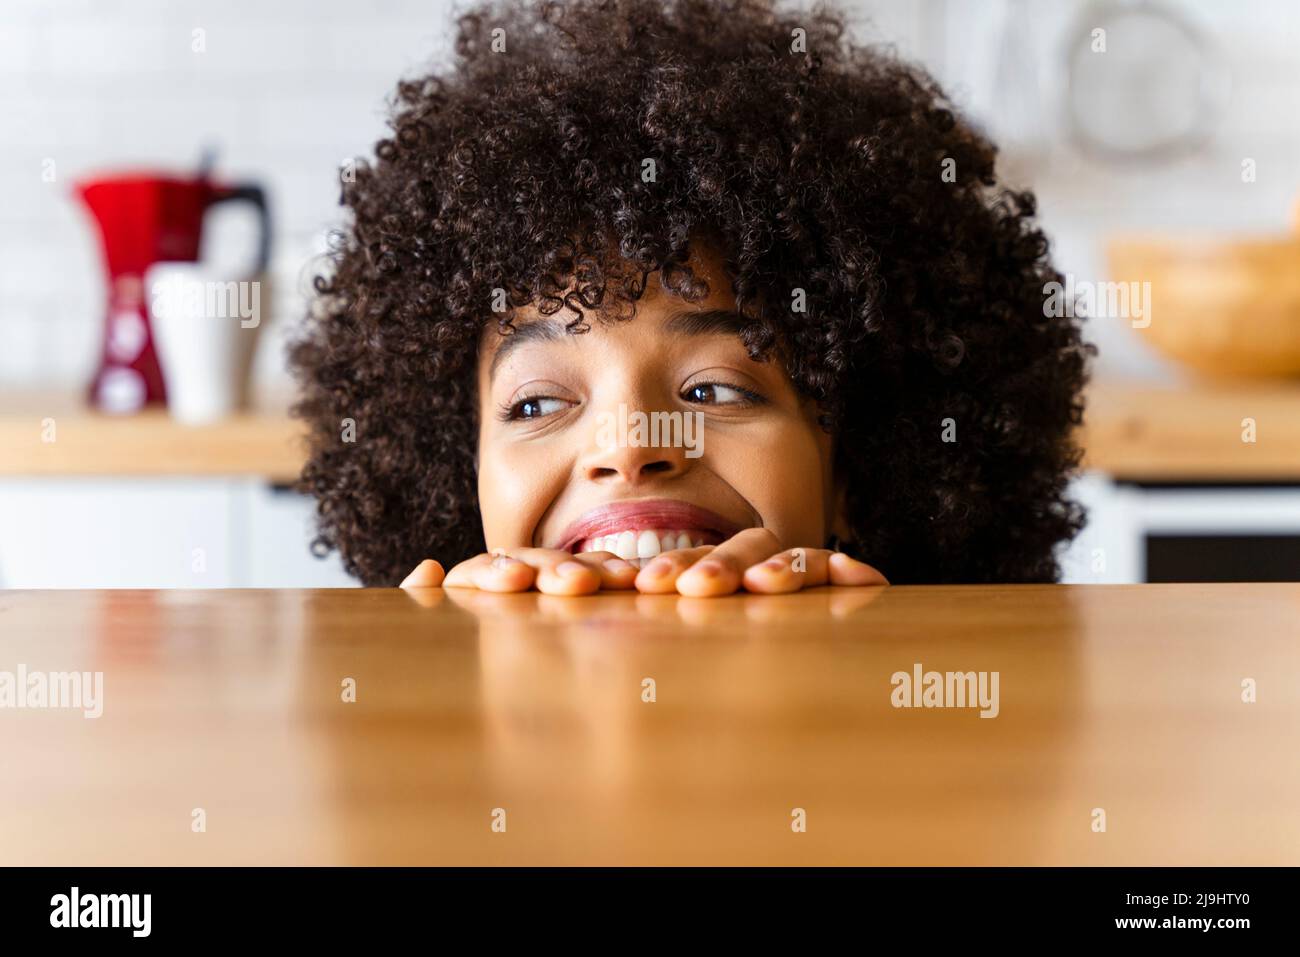 Happy woman with Afro hairstyle hiding behind kitchen island at home Stock Photo